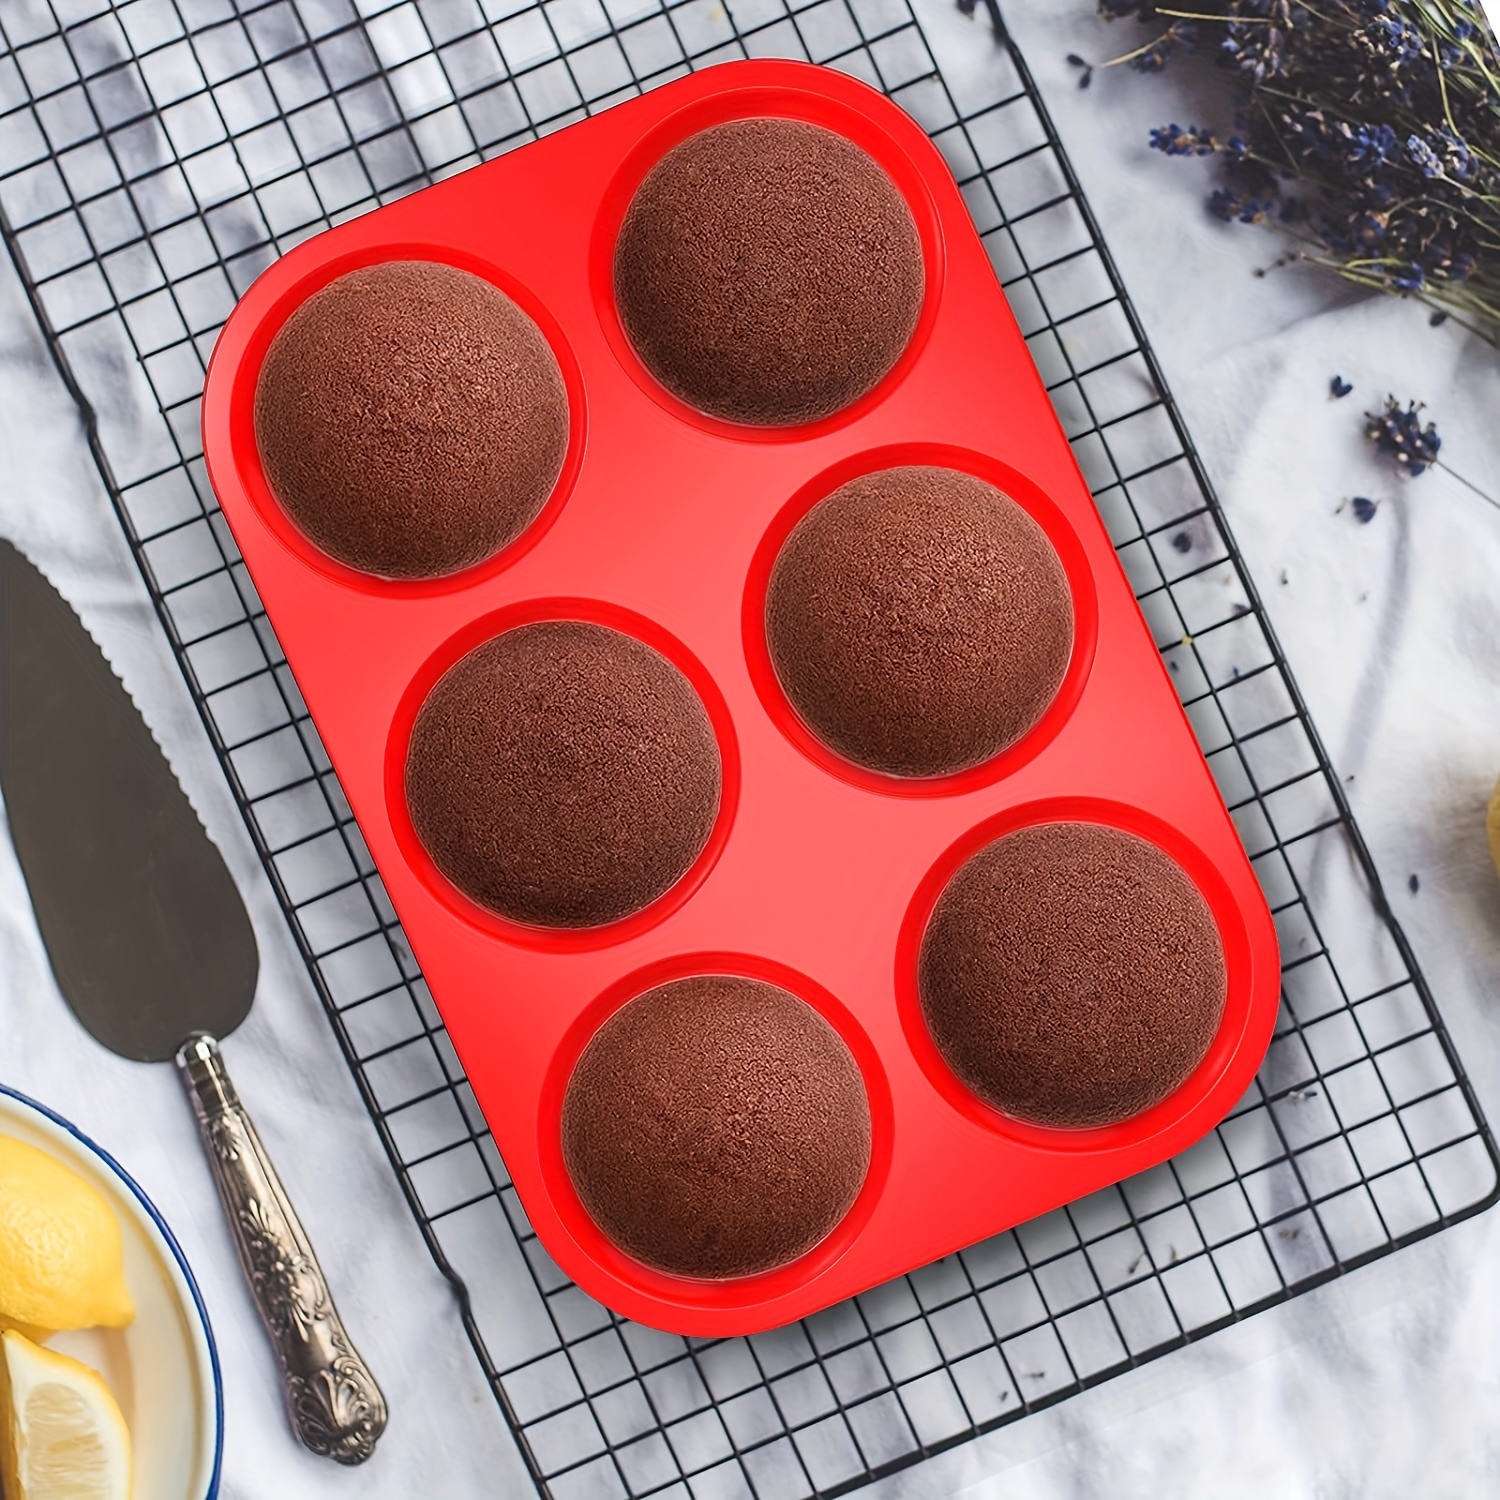  4 Cup Large Muffin Cupcake Moulds/Trays, Non Stick